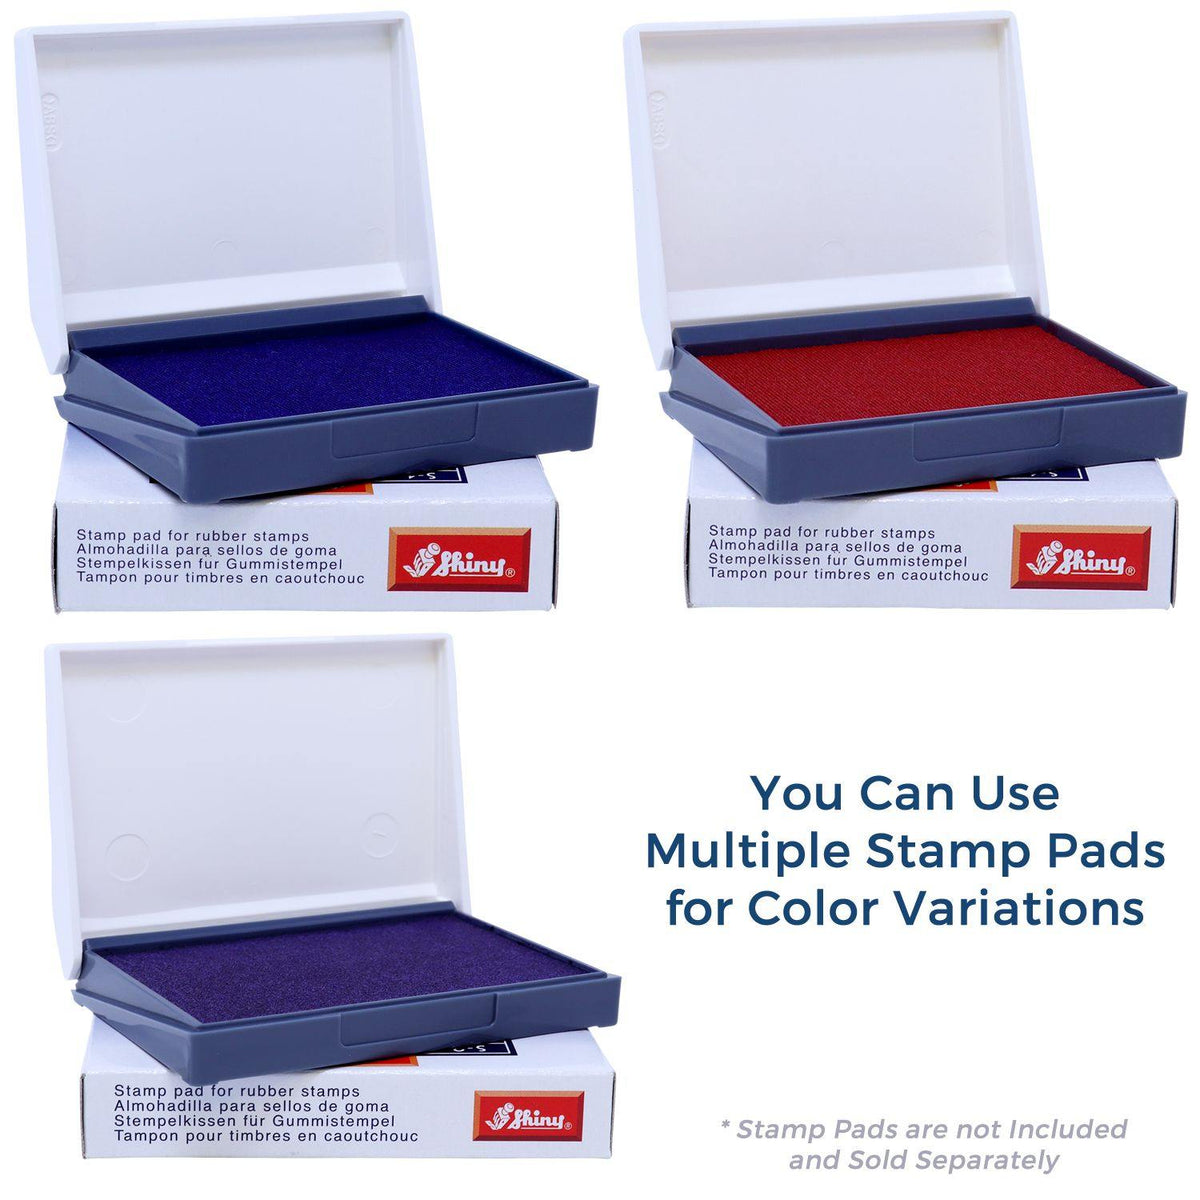 Stamp Pads for Large Personal Rubber Stamp Available